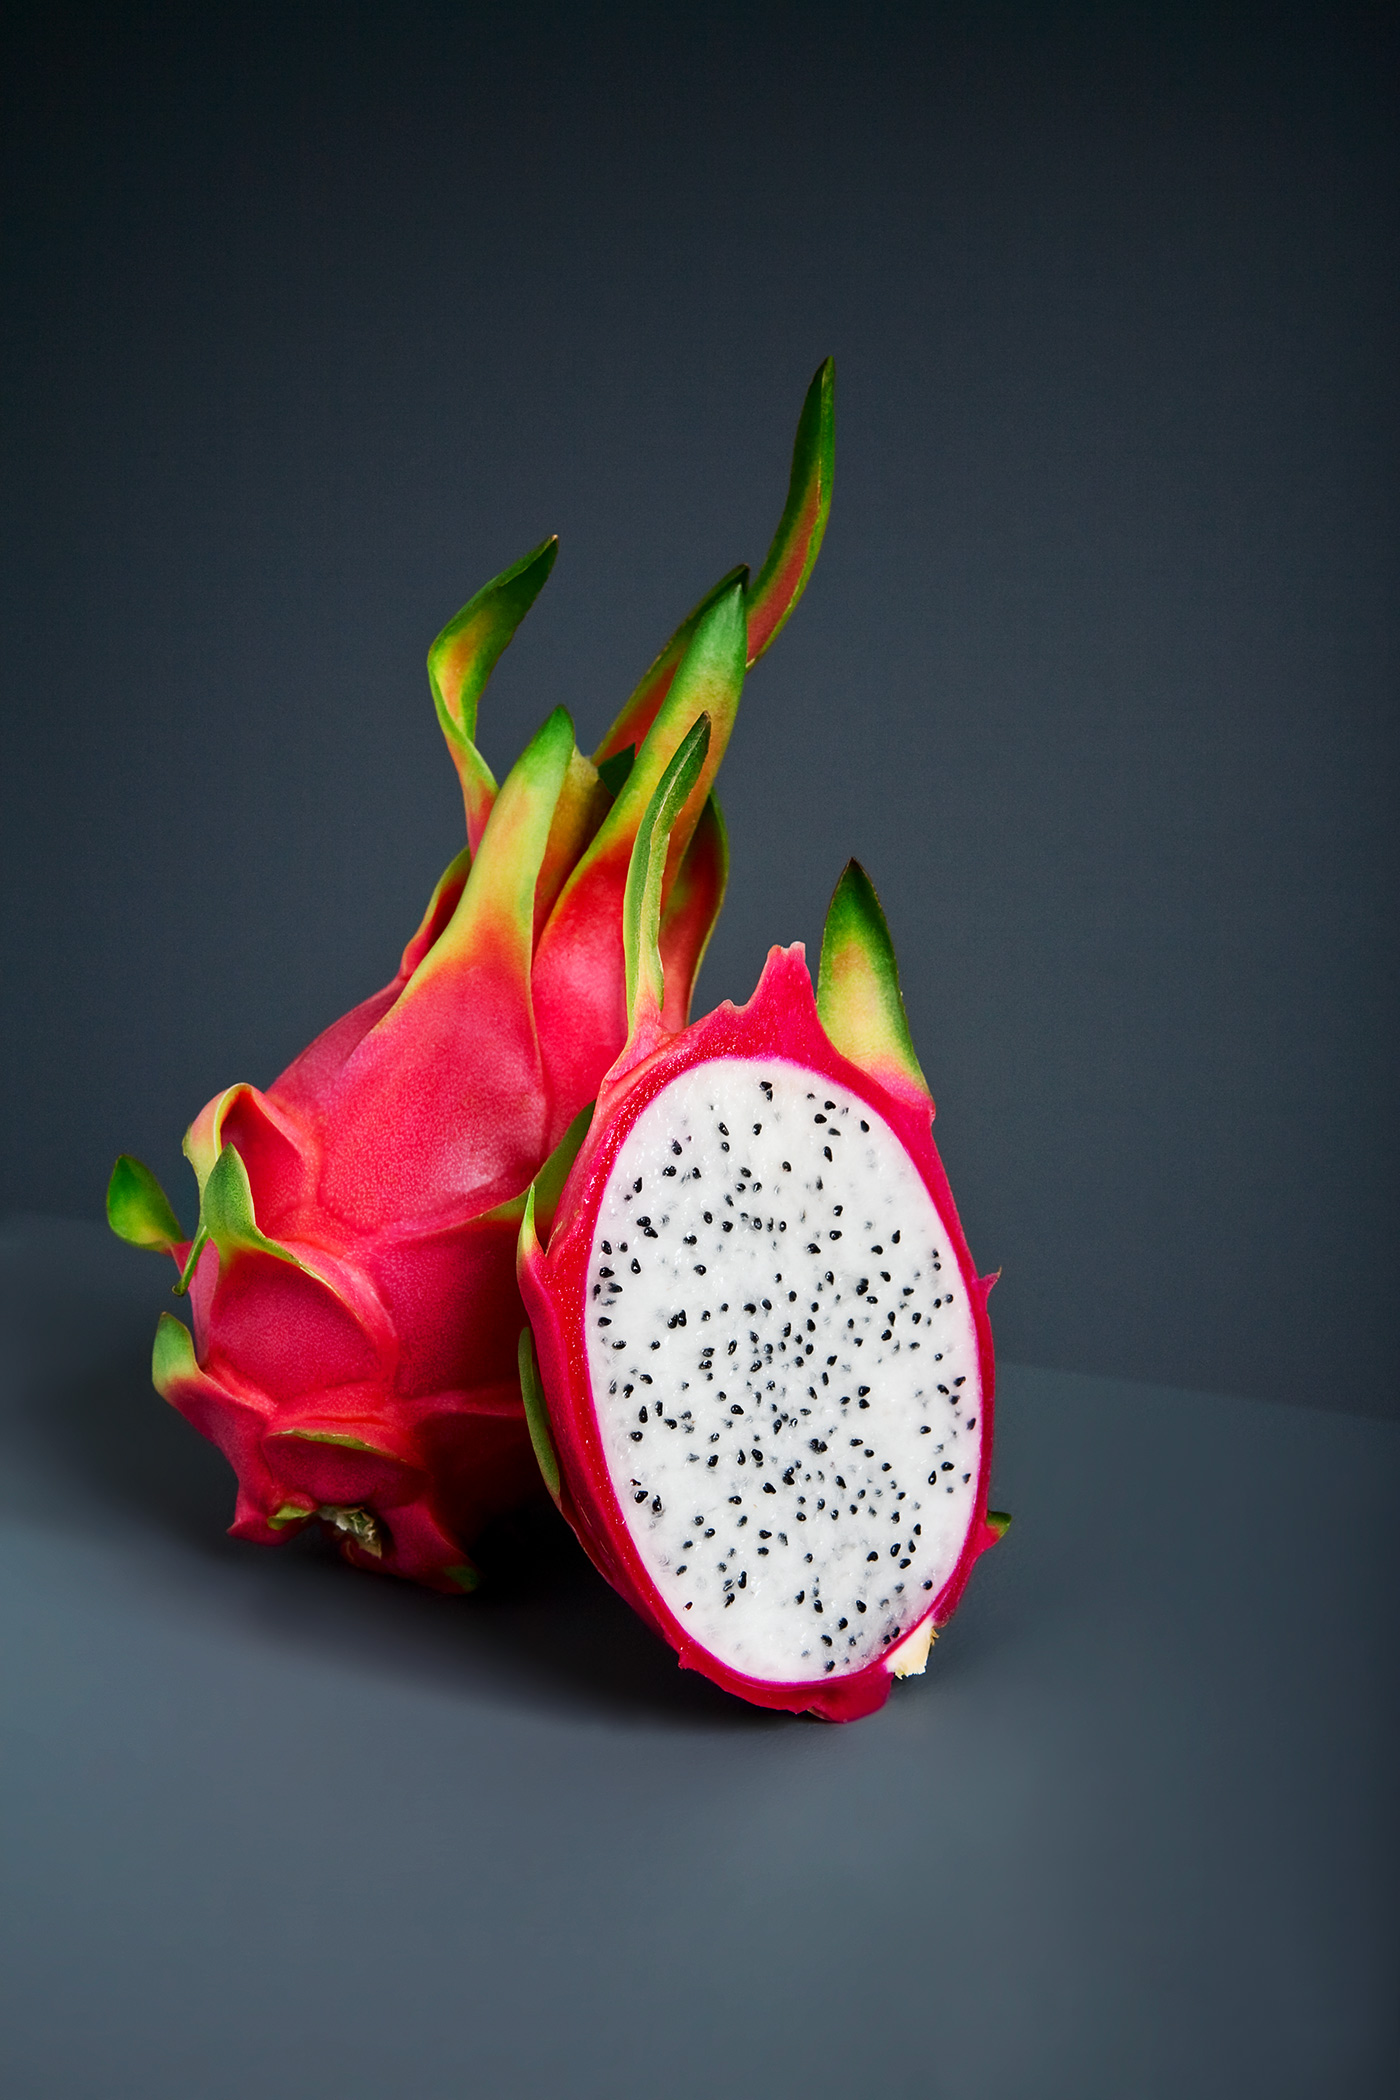 Dragon Fruit, Total Produce Annual Report, Commercial food photography